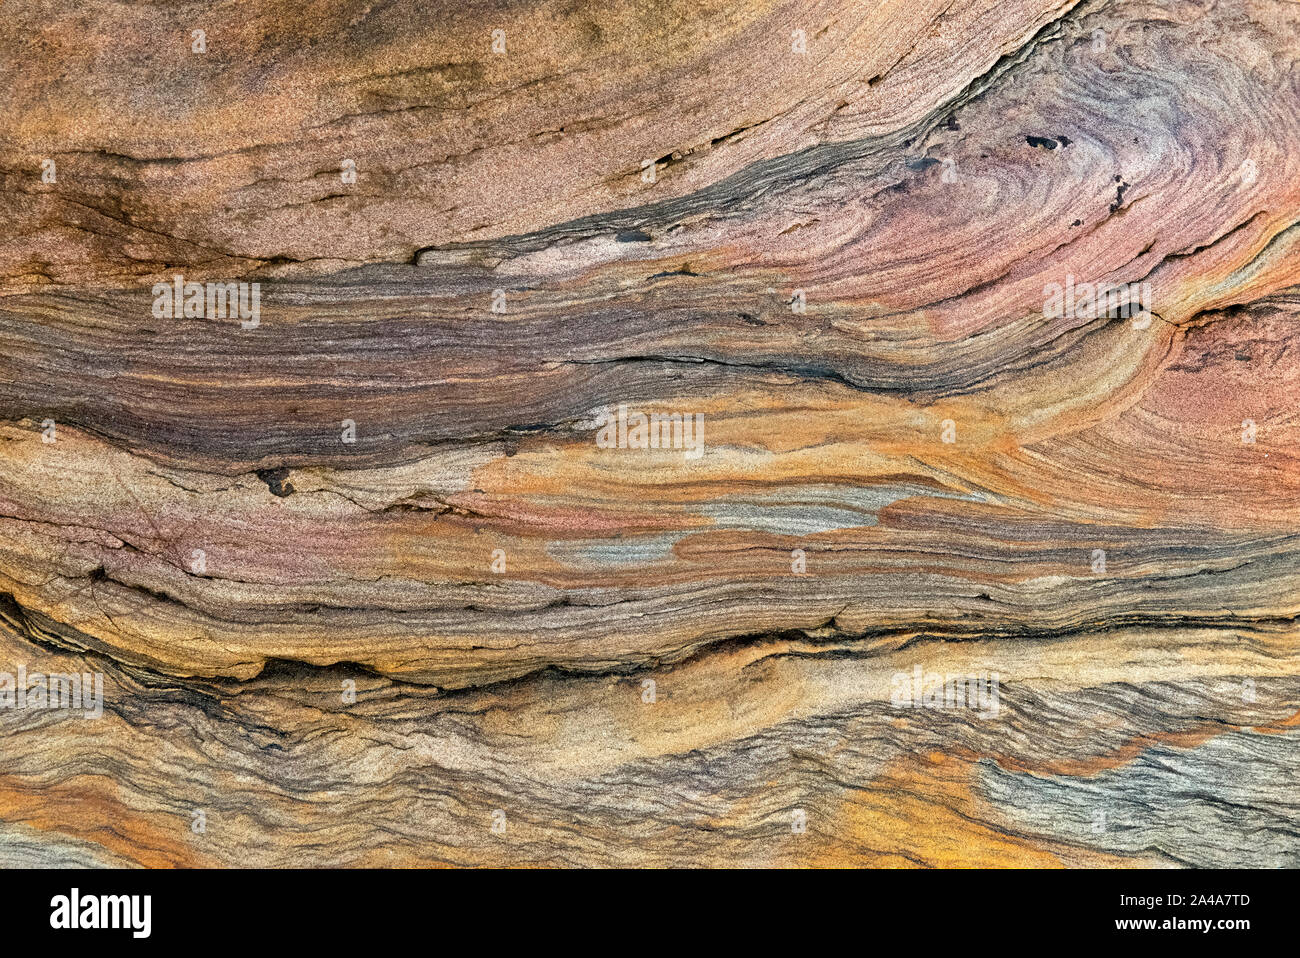 Sedimentary sandstone textured and coloured background Stock Photo